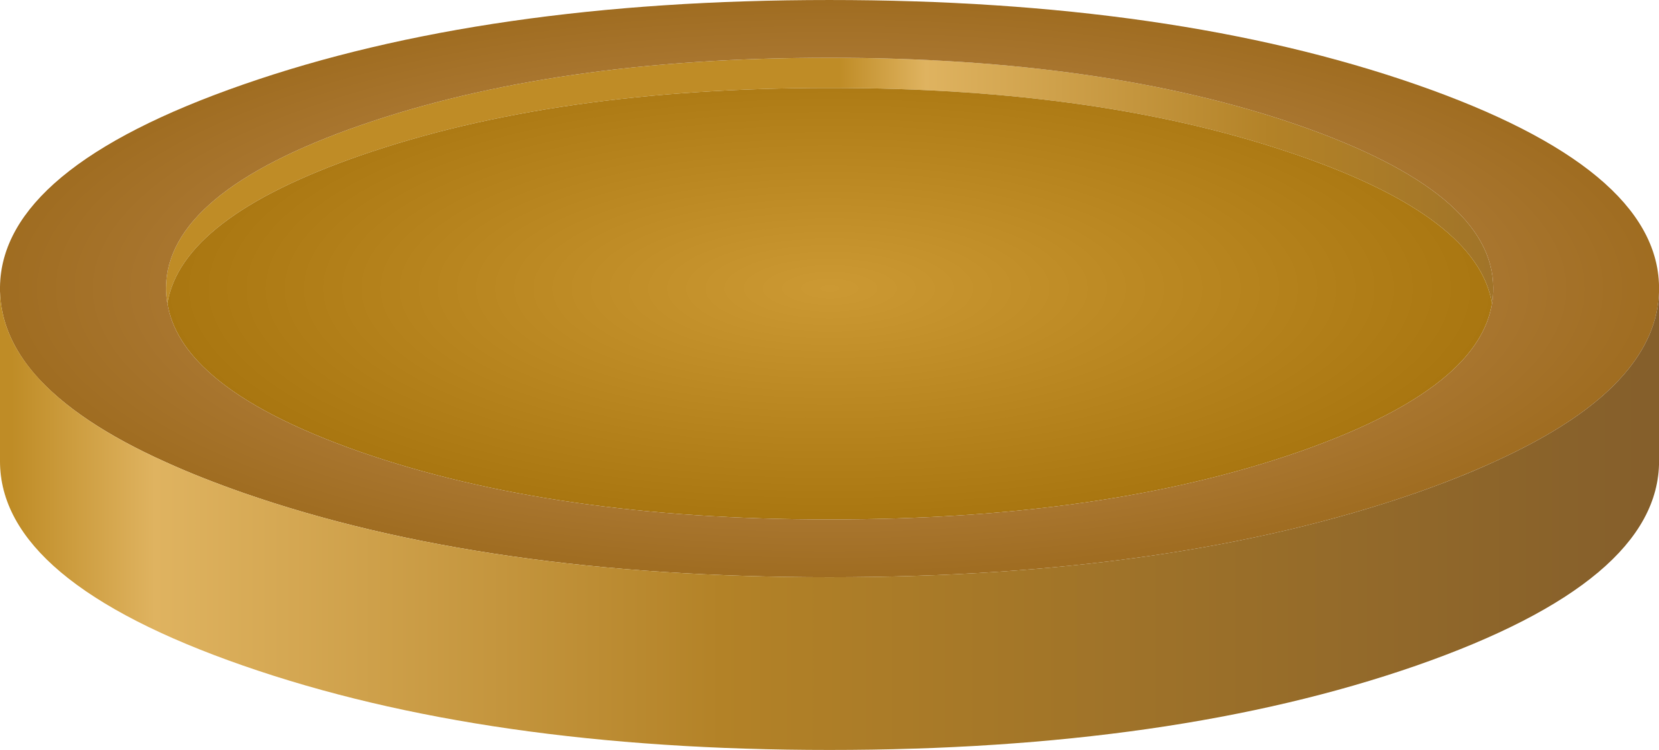 Oval,Circle,Material